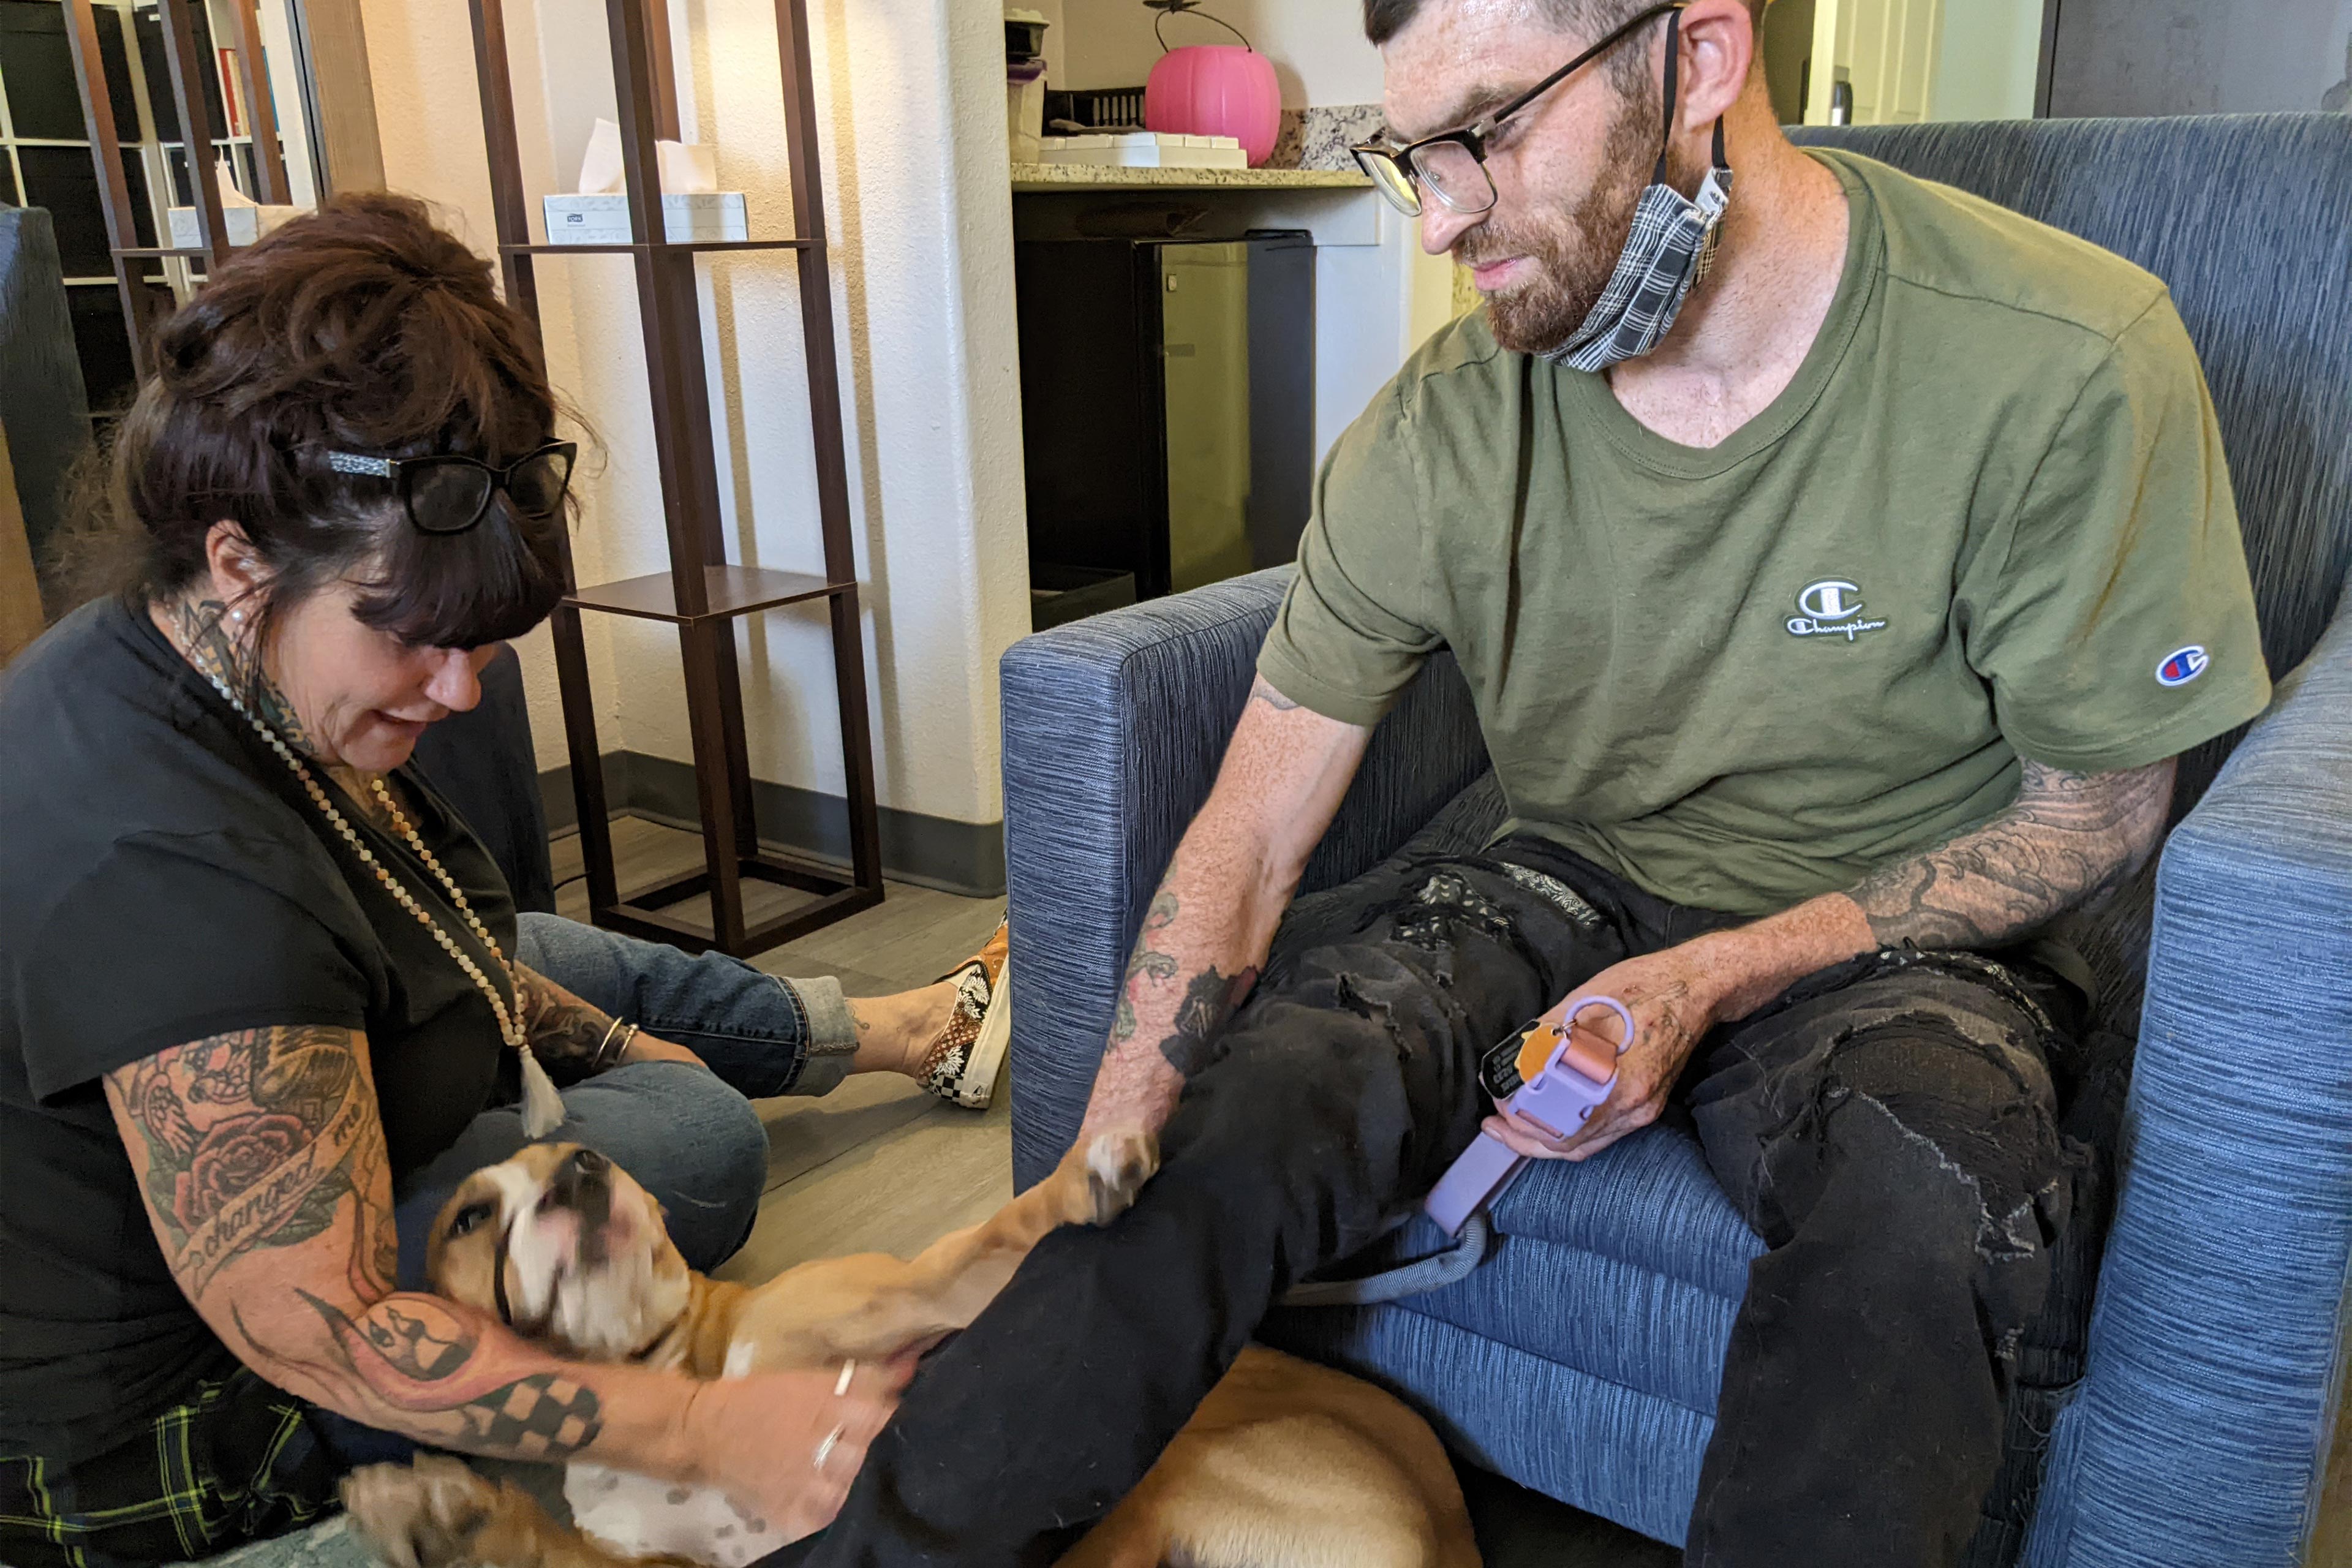 A photo shows Ian Dereus sitting in a chair as Donna Nortan pets his dog on the floor.